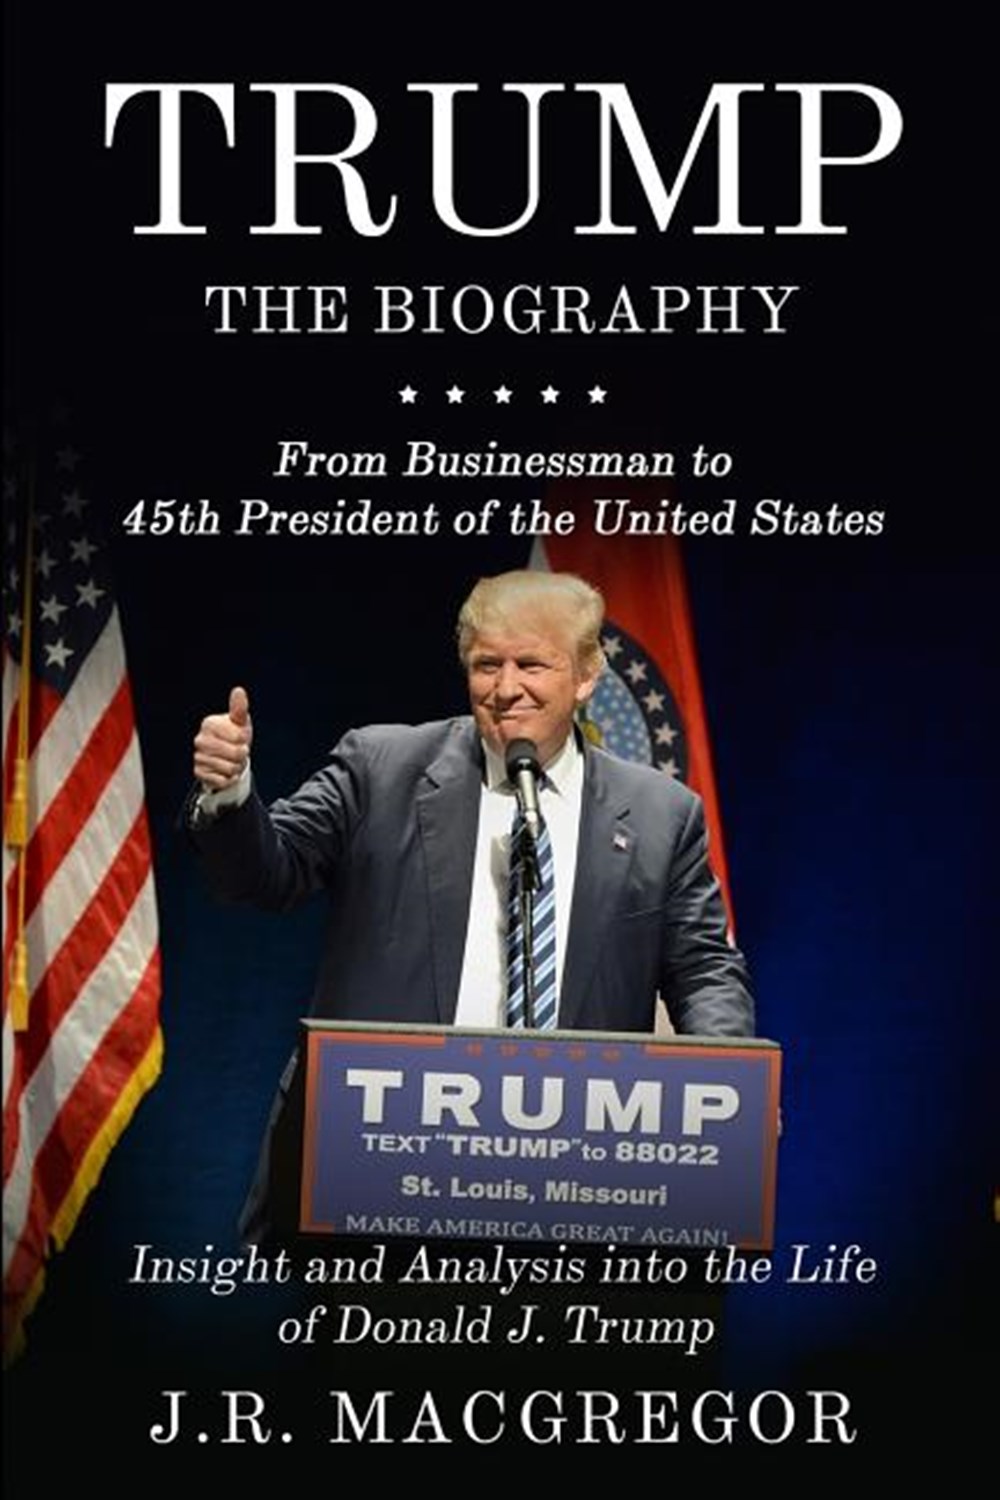 Trump - The Biography: From Businessman to 45th President of the United States: Insight and Analysis